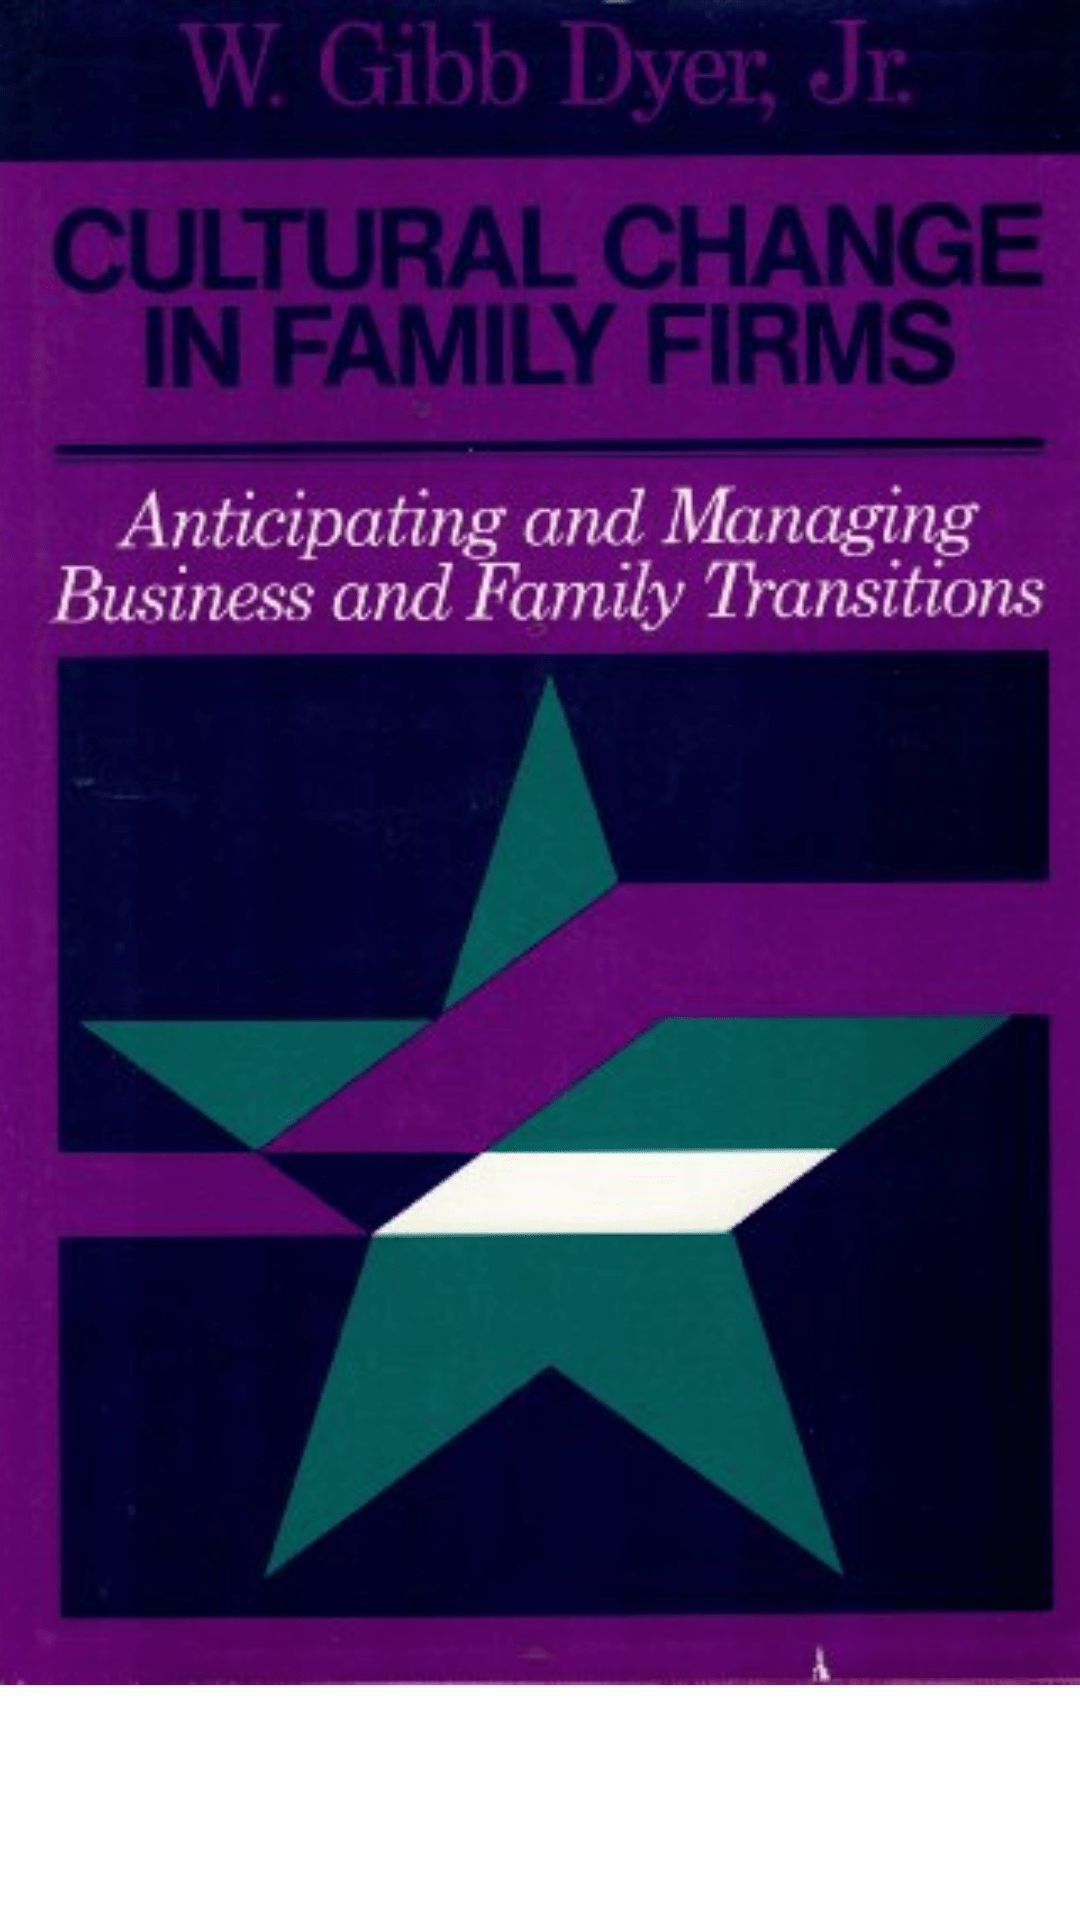 Cultural Change in Family Firms: Anticipating and Managing Business and Family Transitions